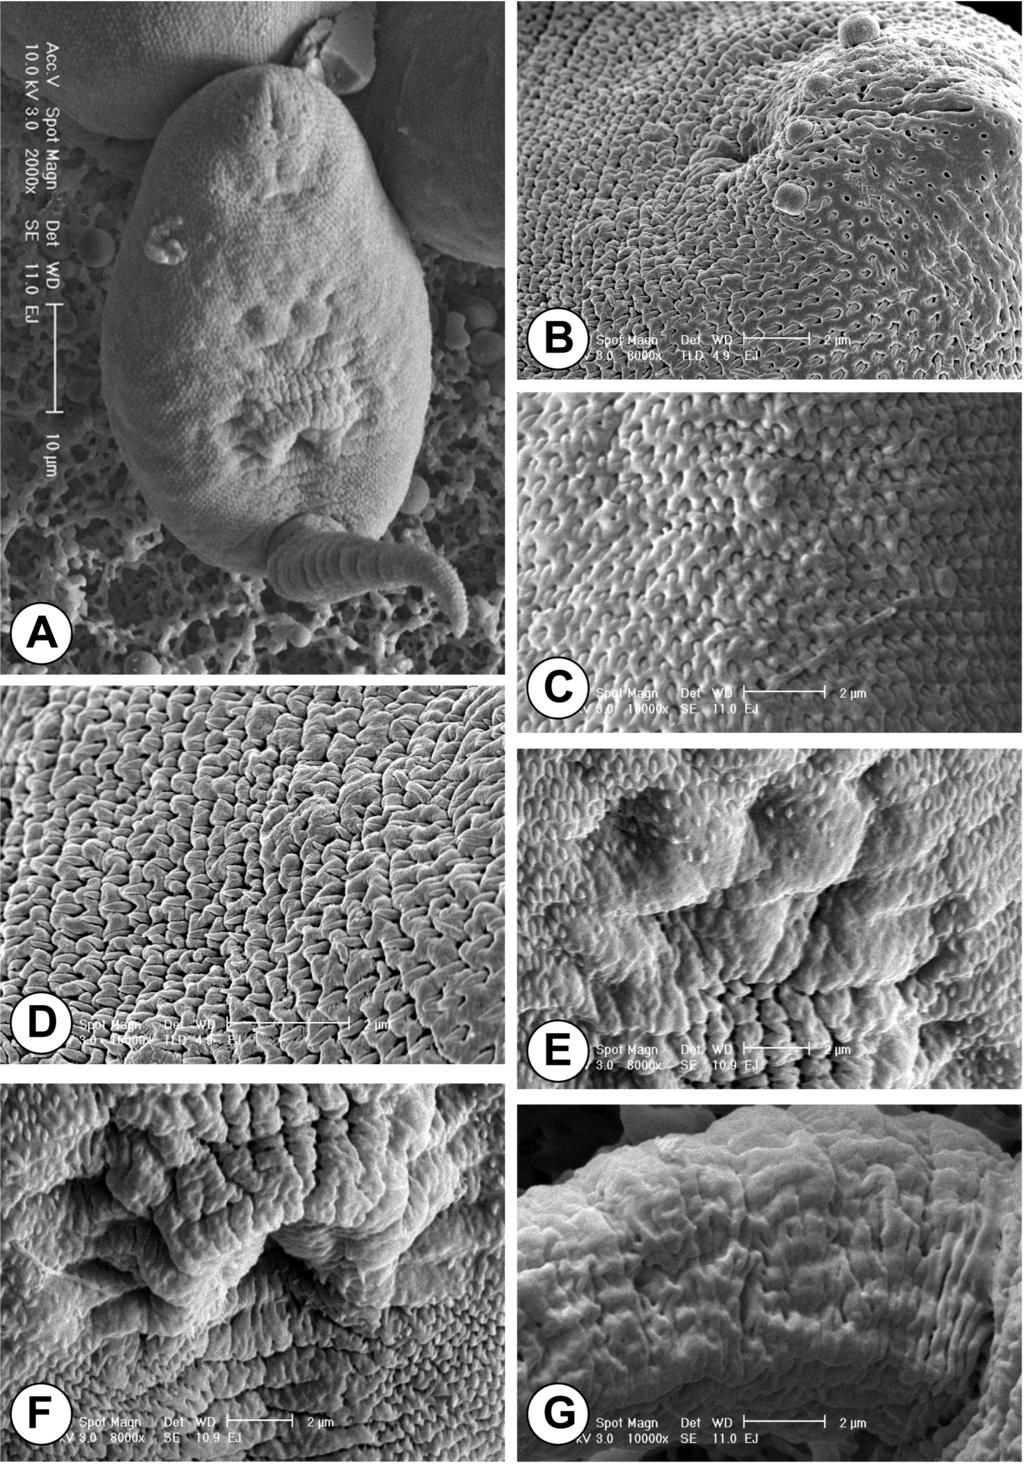 238 THE JOURNAL OF PARASITOLOGY, VOL. 92, NO. 2, APRIL 2006 FIGURE 2. SEM observations of the ventral surface of Echinochasmus japonicus cercariae. (A) Whole ventral view. (B) Oral sucker.